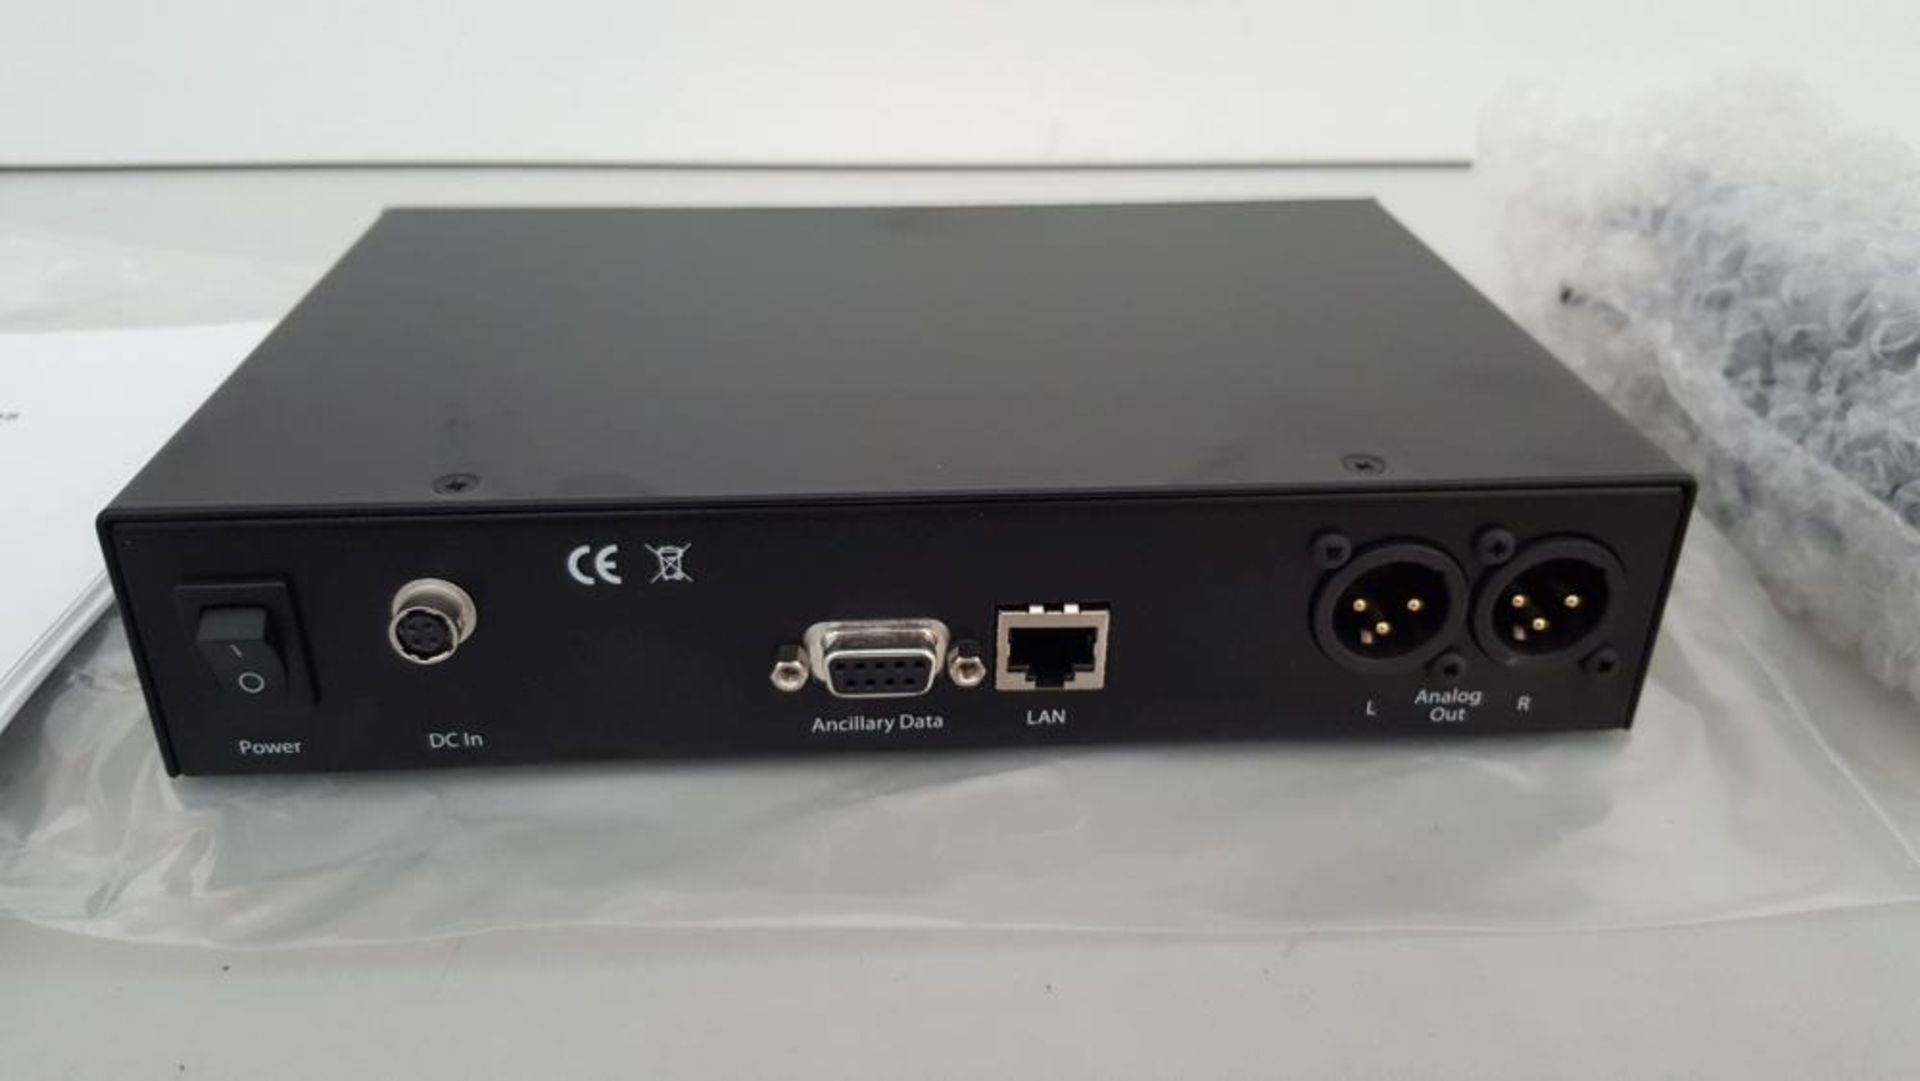 1 x MAYAH COMMUNICATIONS GANYMED 1002 PRO (RRP:£1500.00) - Ref RC102 - CL011 - Location: Altrincham - Image 3 of 3